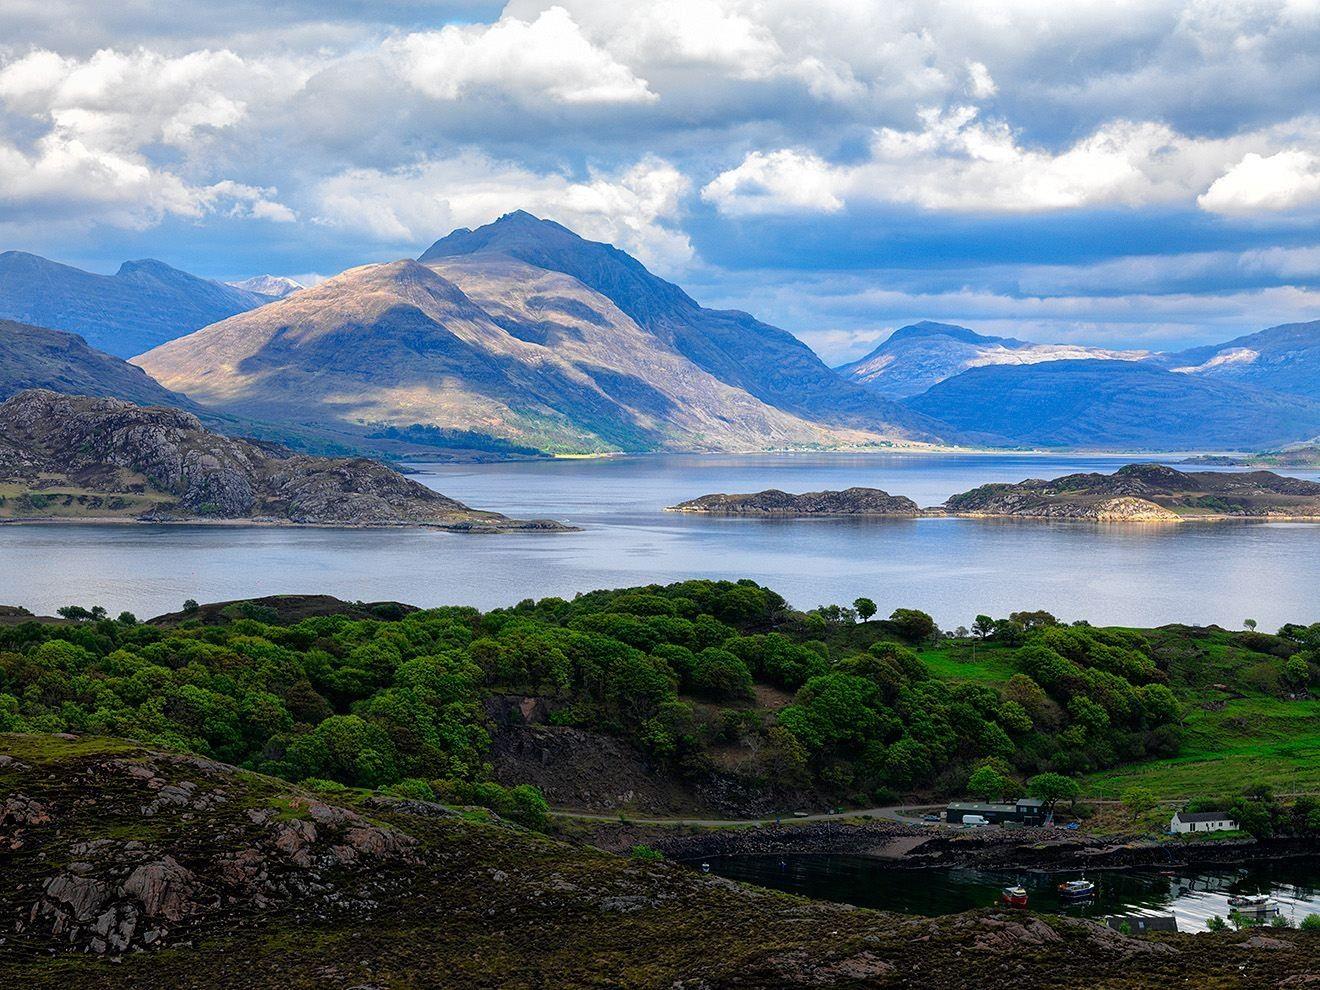 Wallpapers Tagged With Highlands: Highlands Idyllic Dore